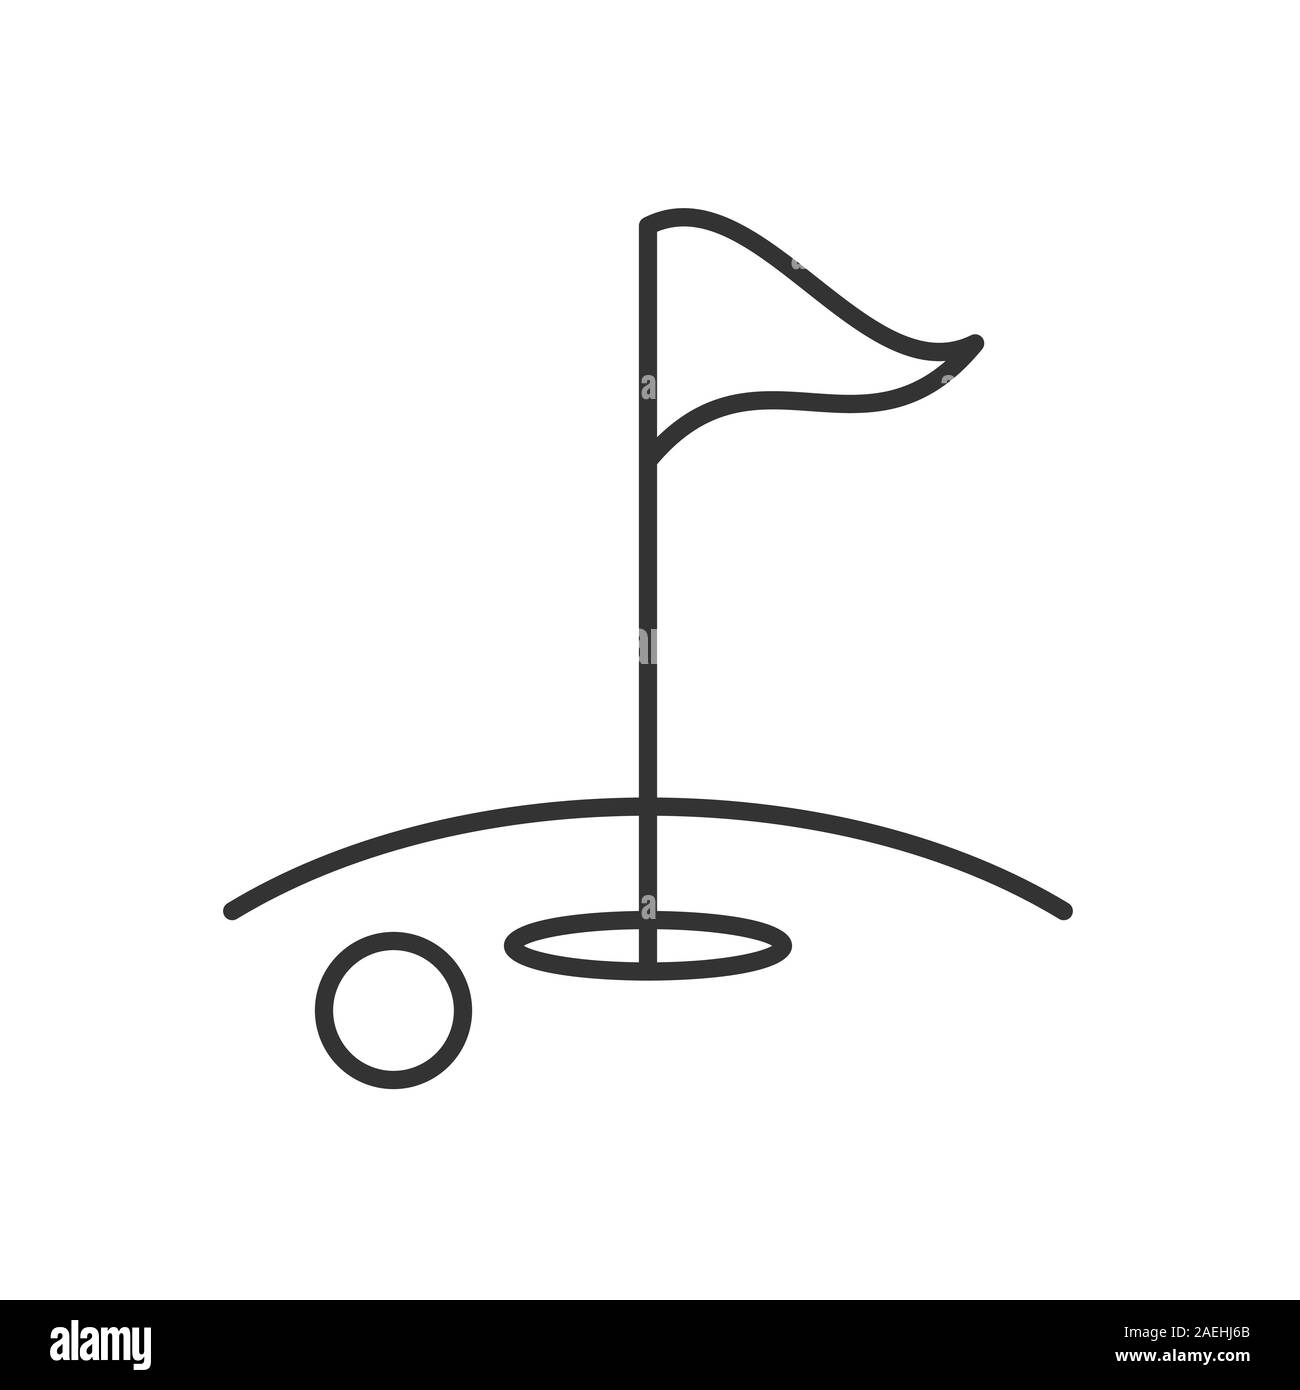 Learn How To Draw A Golfer (Golf) Step By Step Drawing, 52% OFF